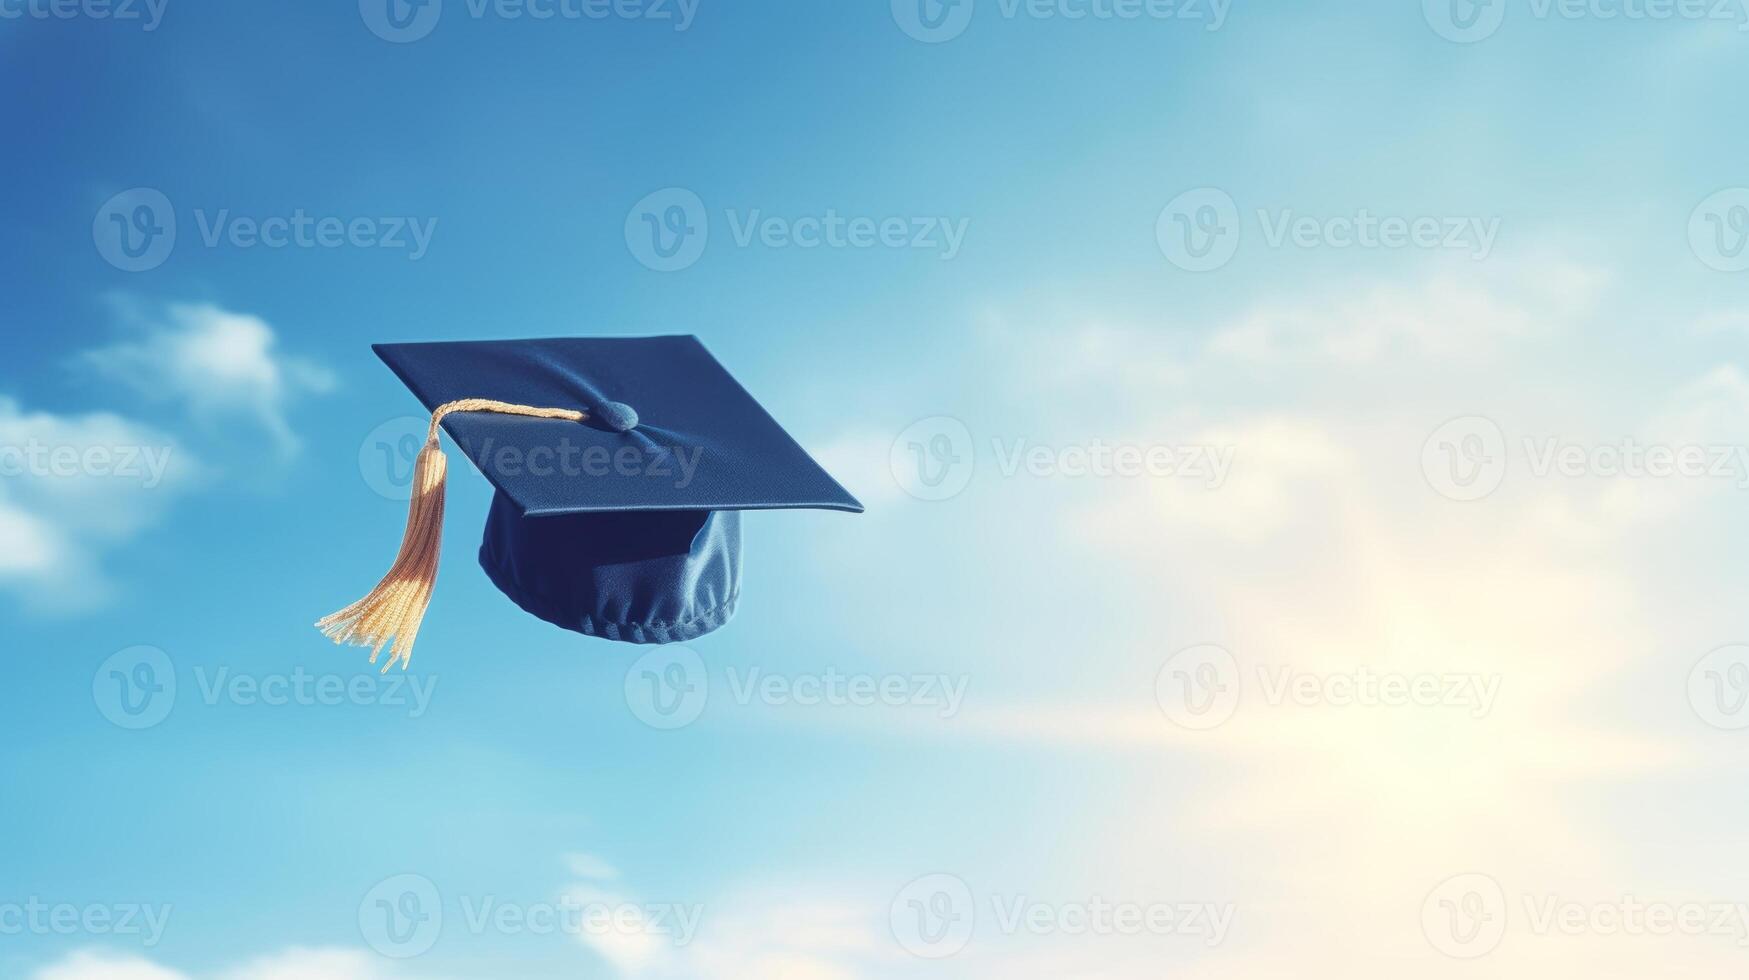 graduation cap flying in the air against a clear blue sky concept of achievement and freedom photo